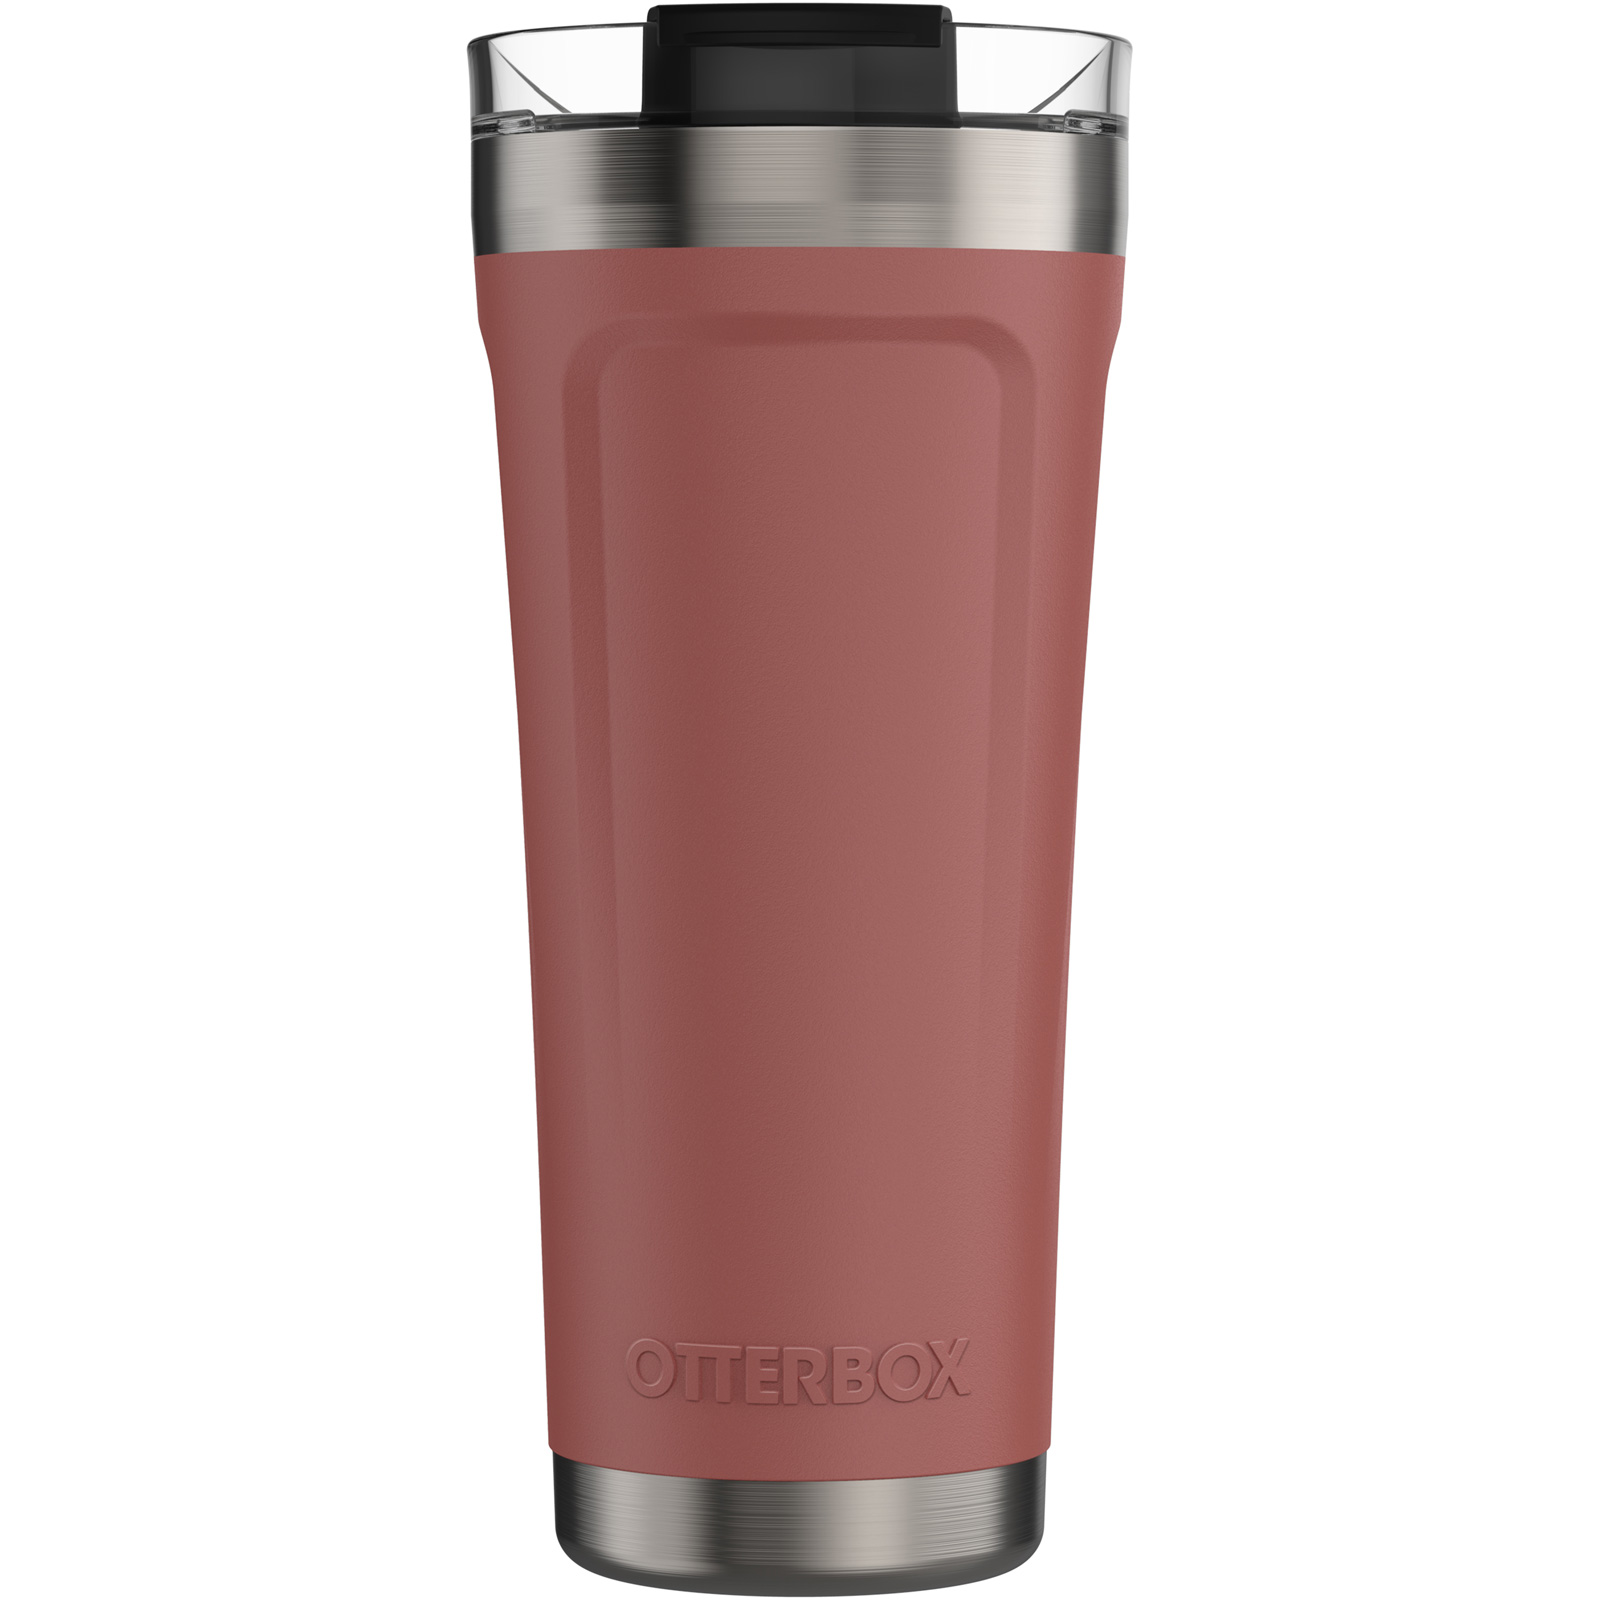 OtterBox Elevation Thermal Tumblers + Shaker Lid: $20 (Today only